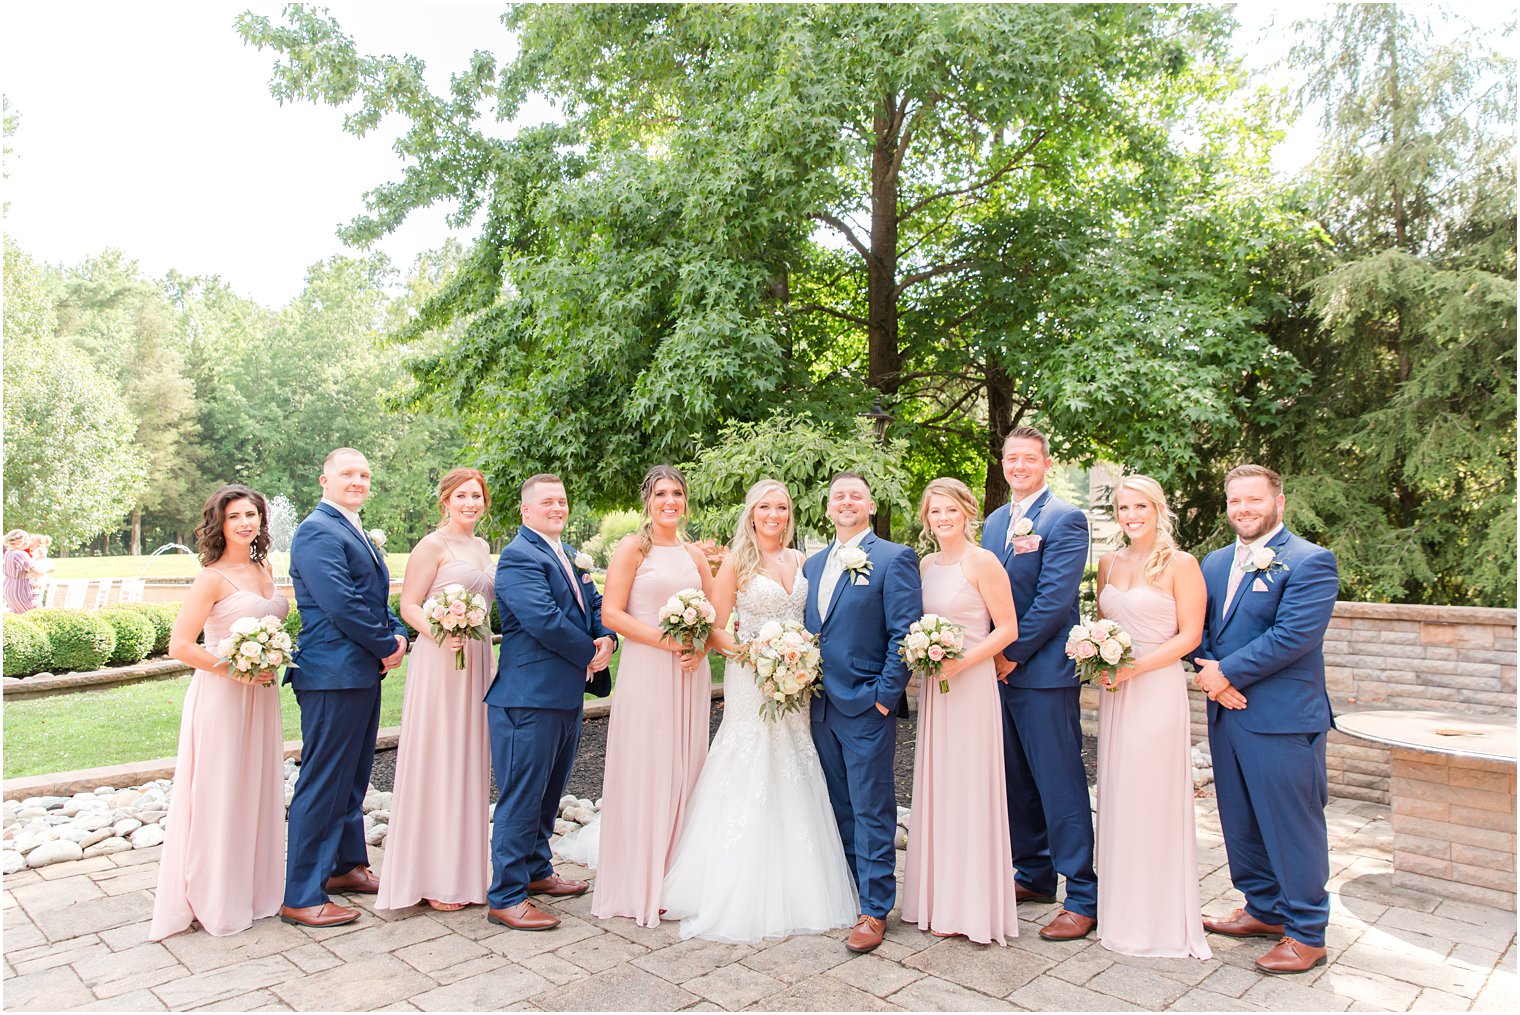 bride and groom pose with wedding party in navy suits and light pink gowns 